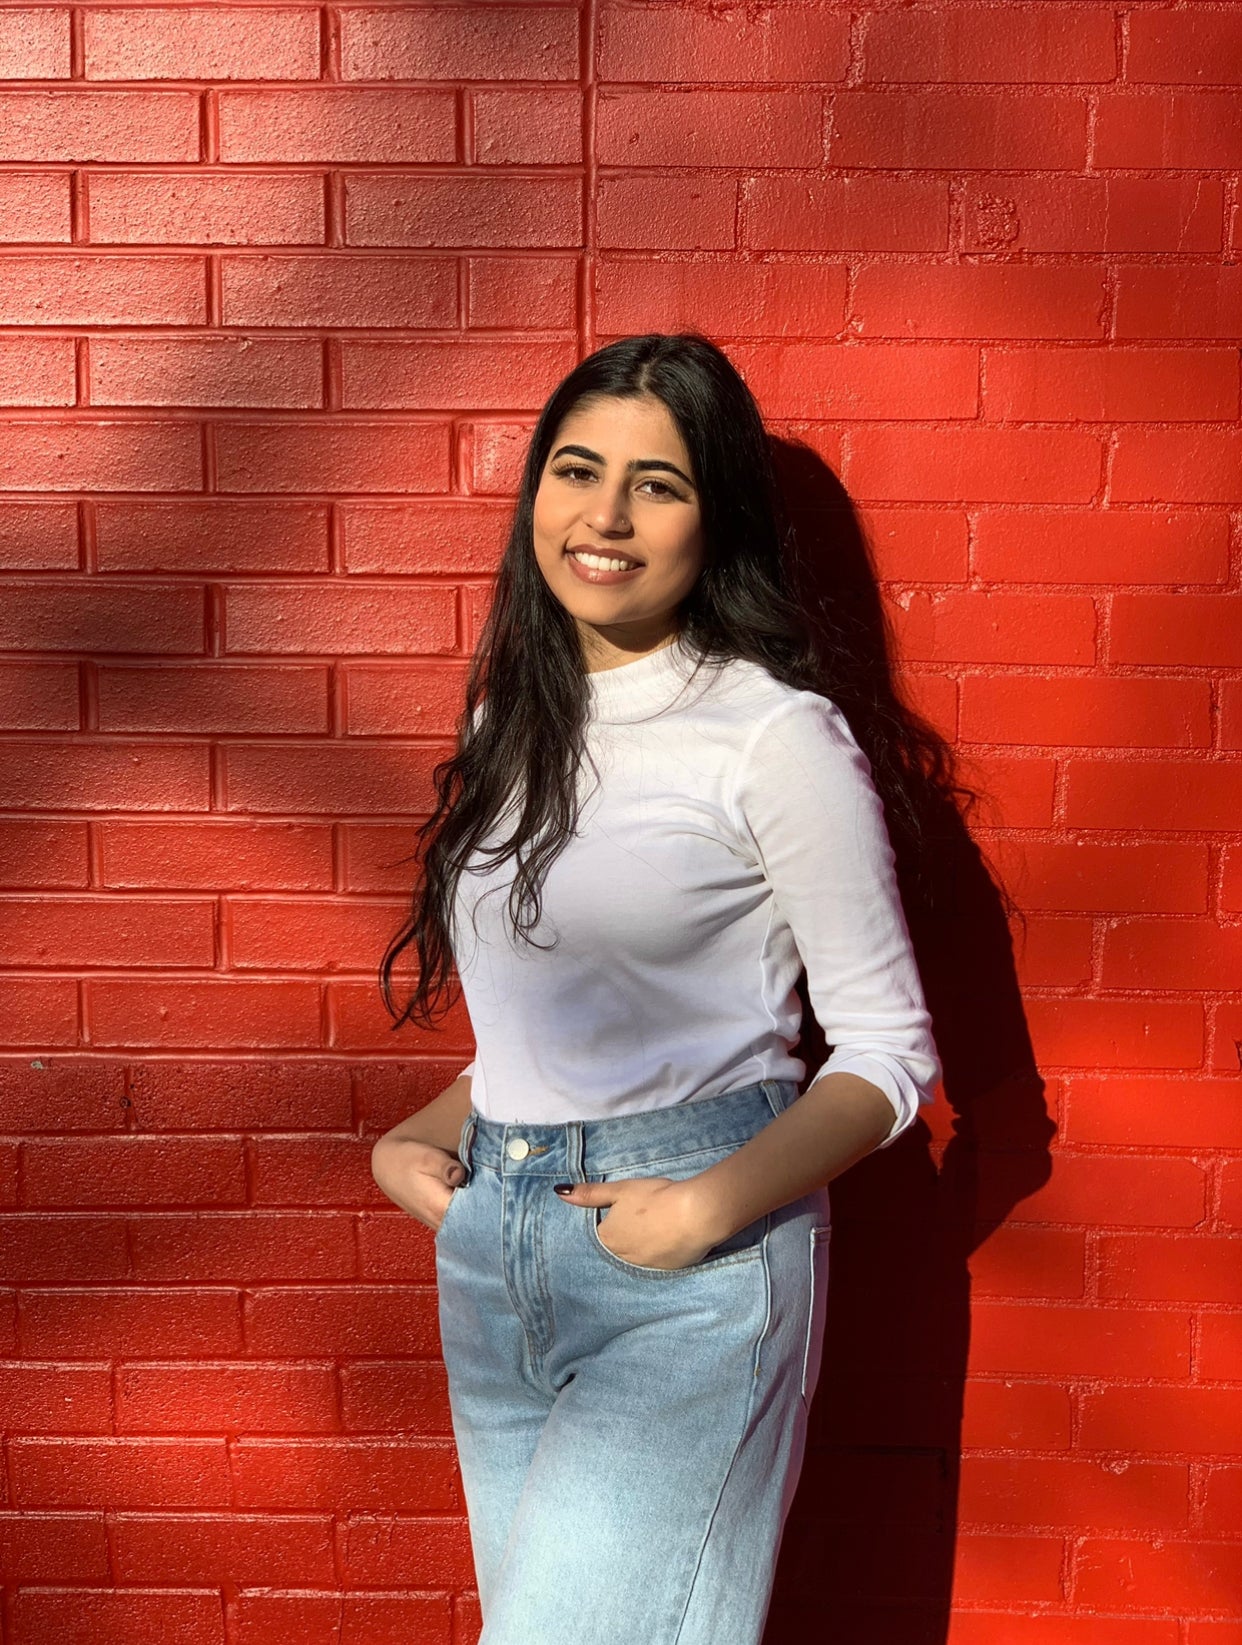 Fatima smiling in front of a red wall